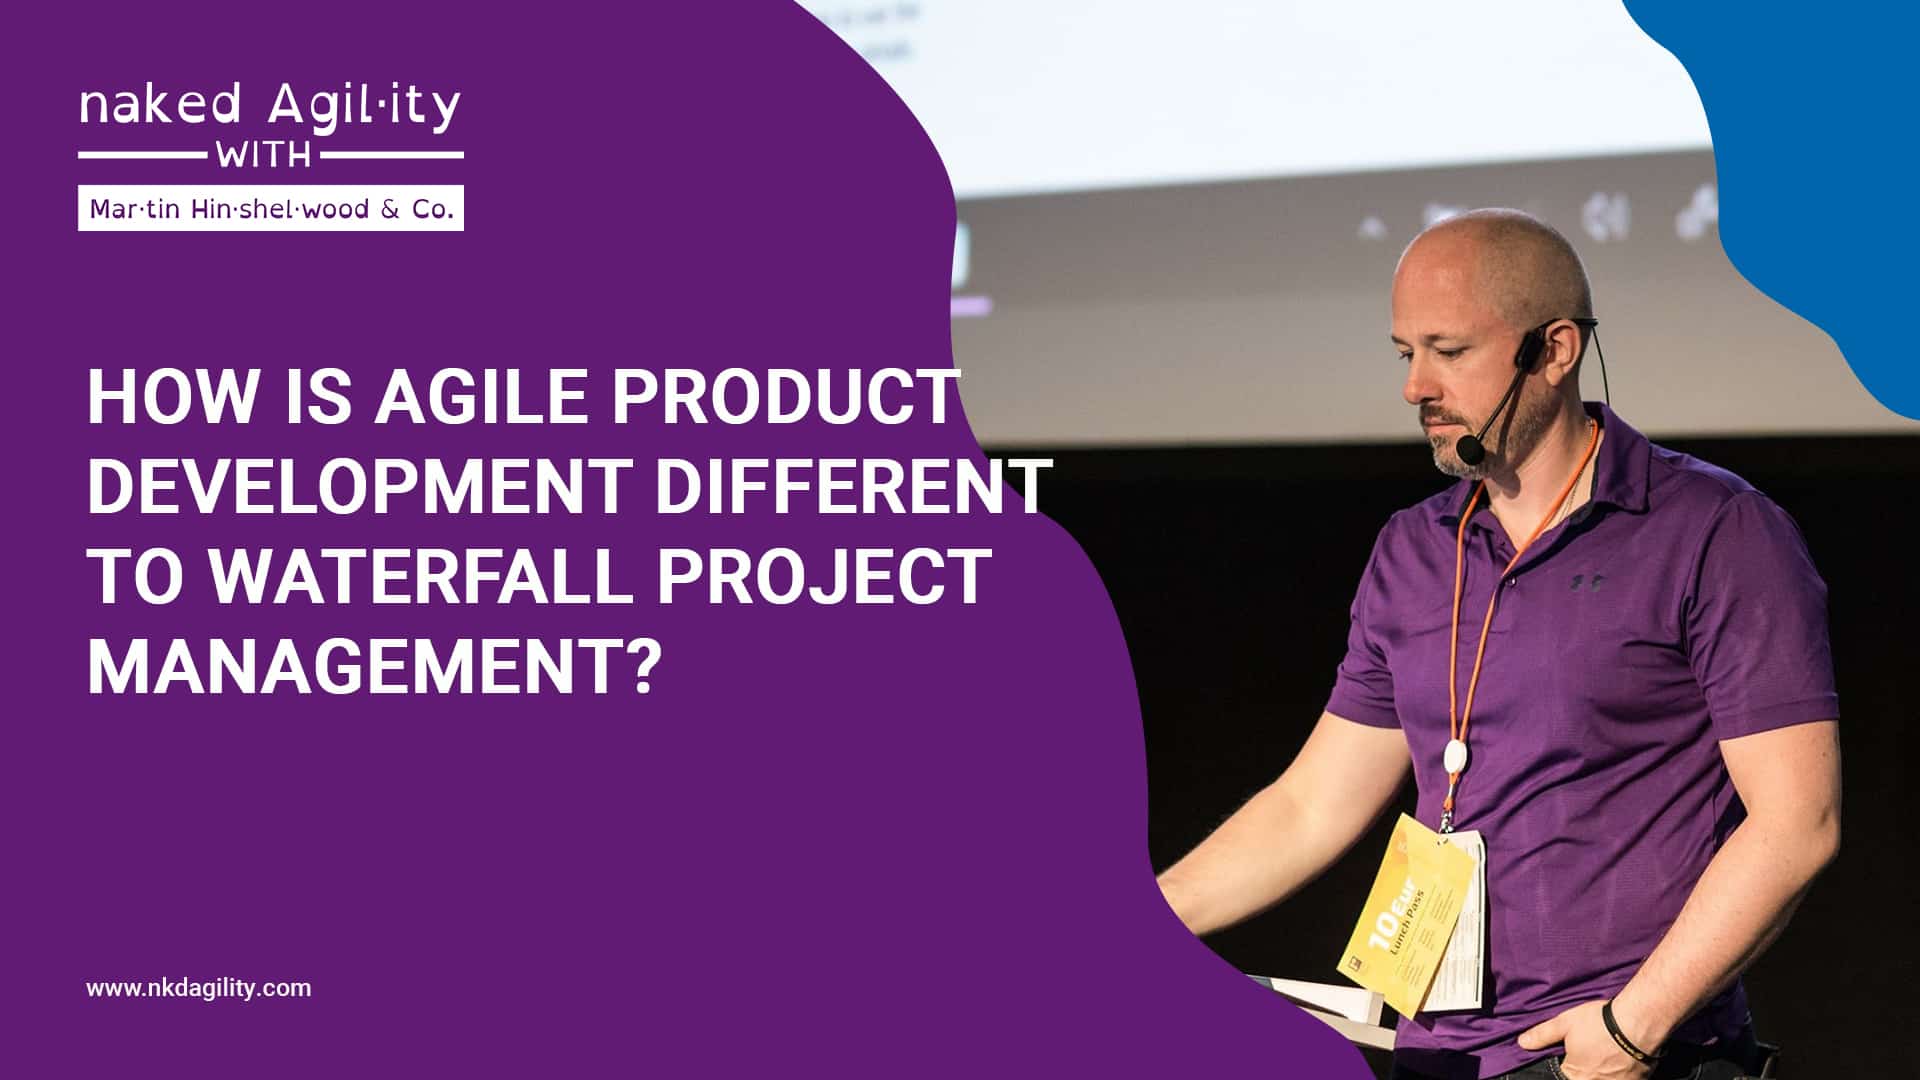 How is agile product development different to waterfall project management?